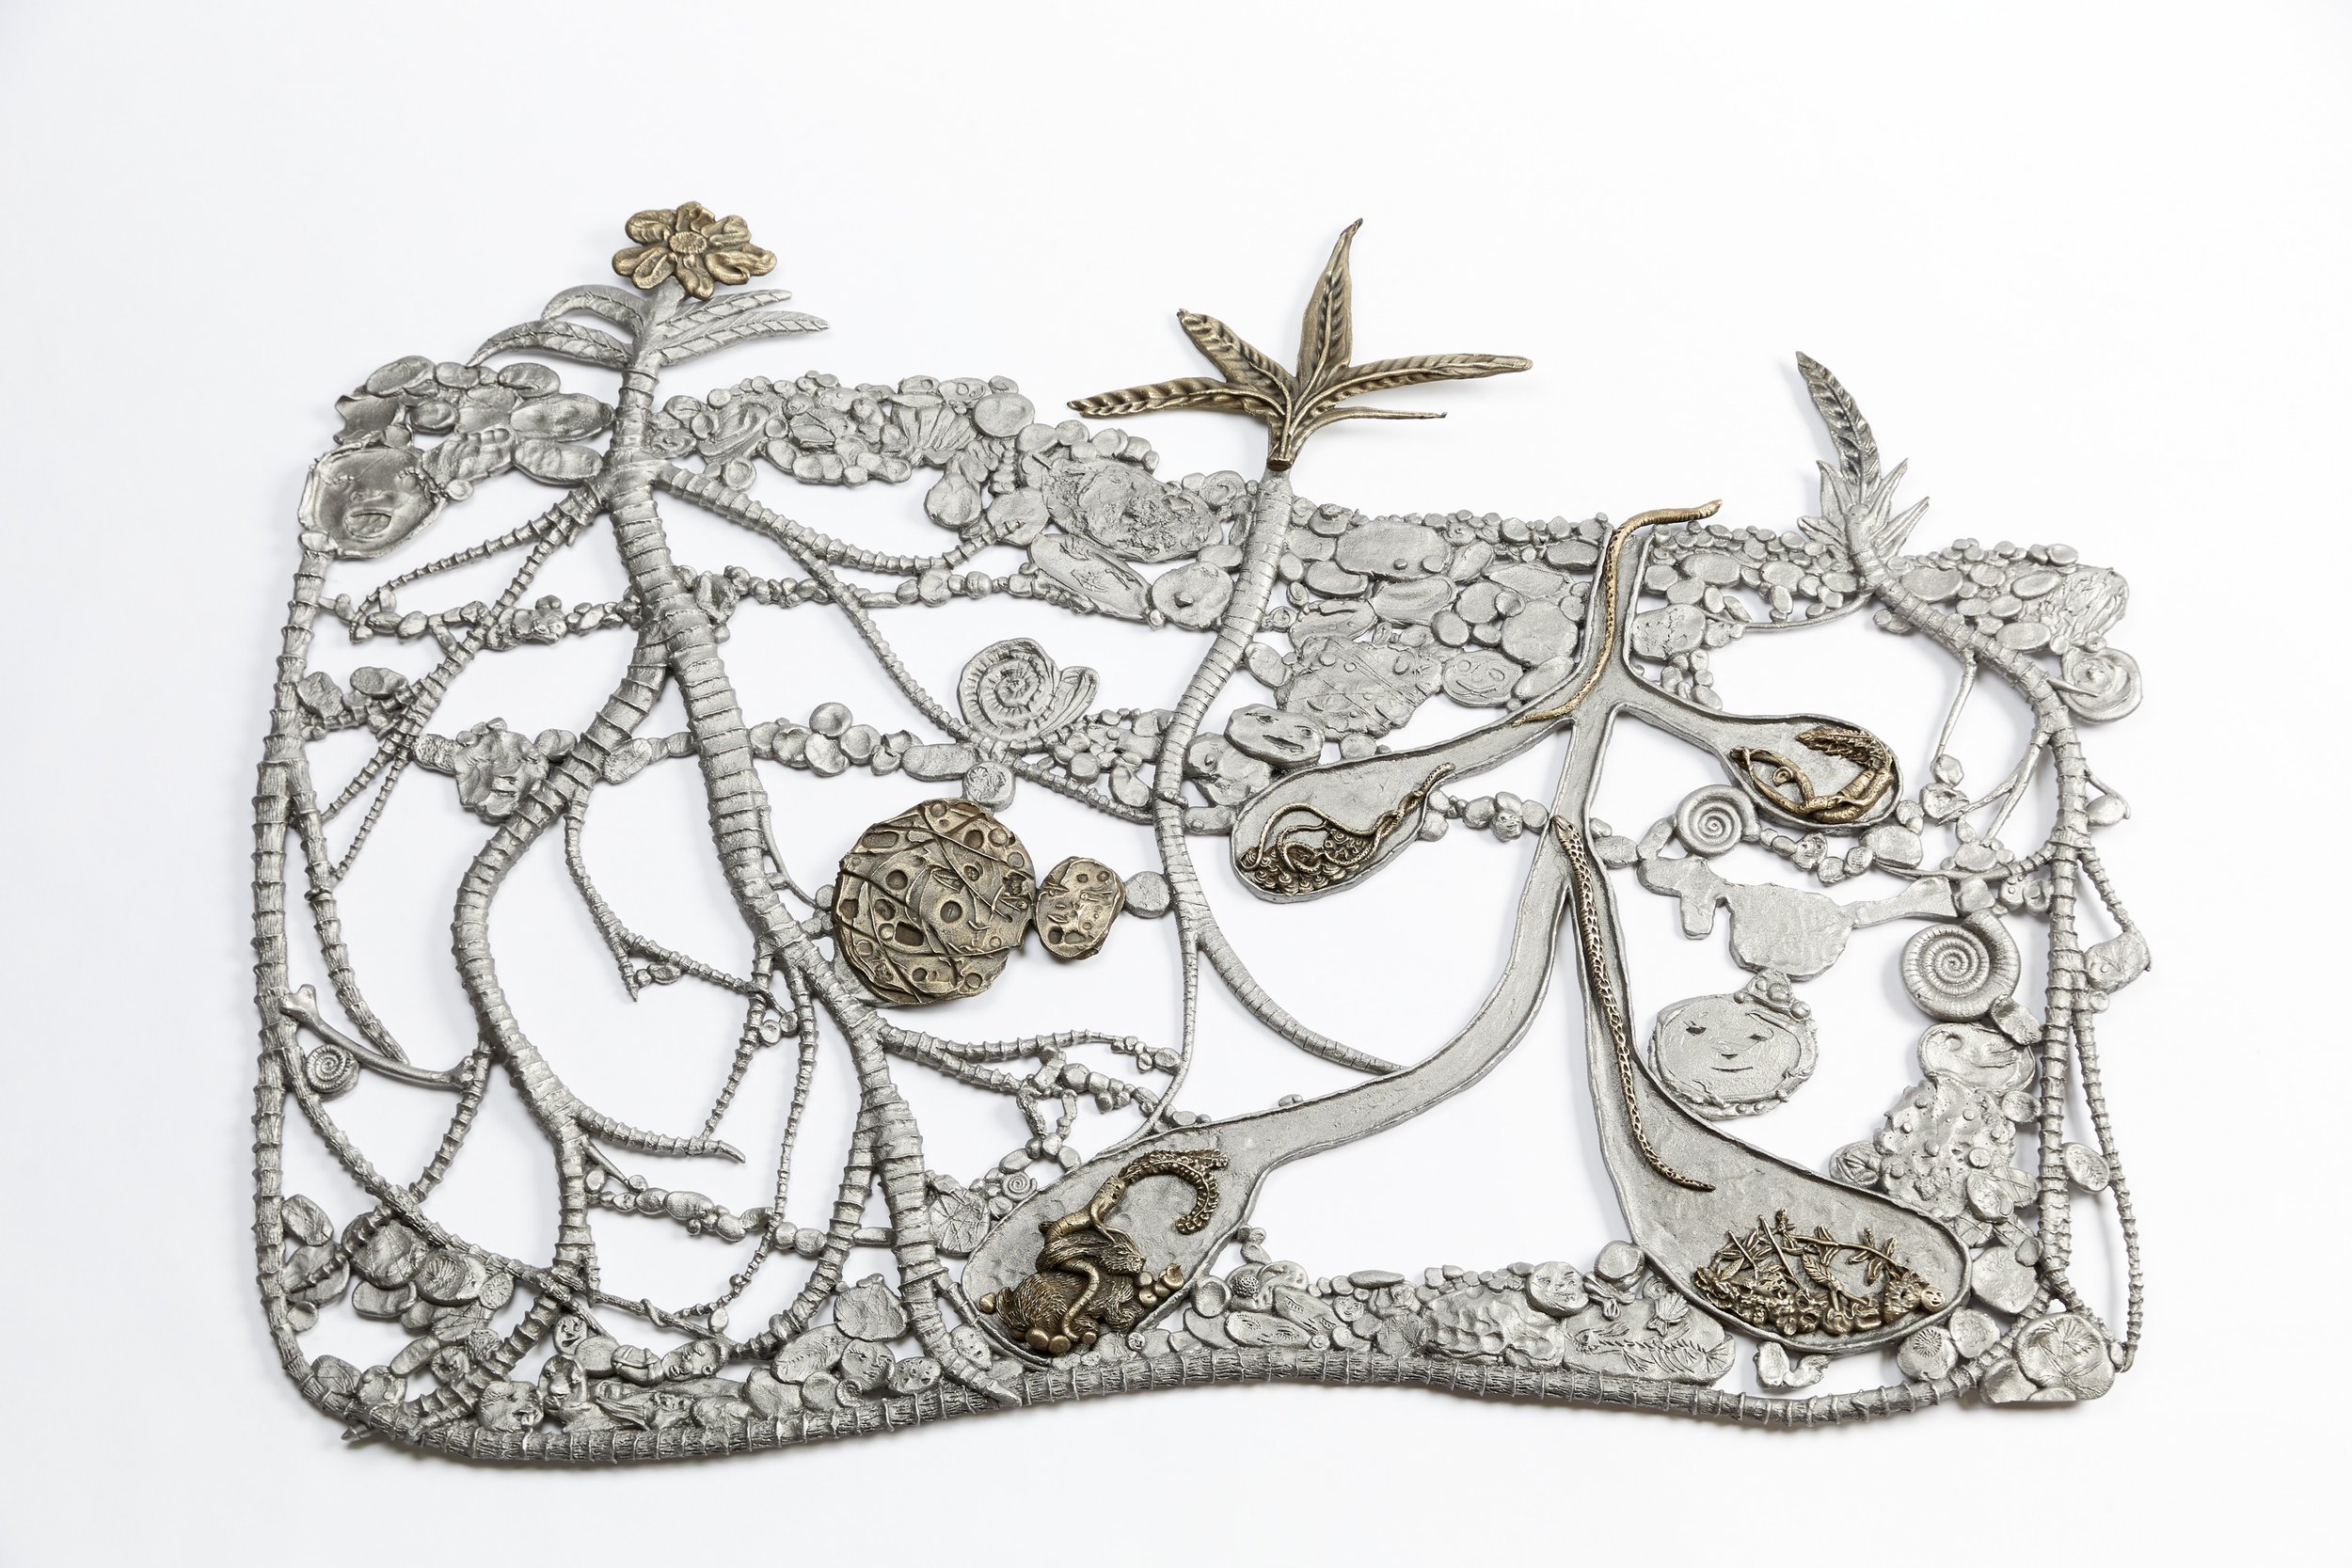  Show Me Your Garden And I Shall See What You Are, 2020. Cast iron and brass 38 x 53 x 1 in. (96.5 x 134.6 x 2.5 cm) 